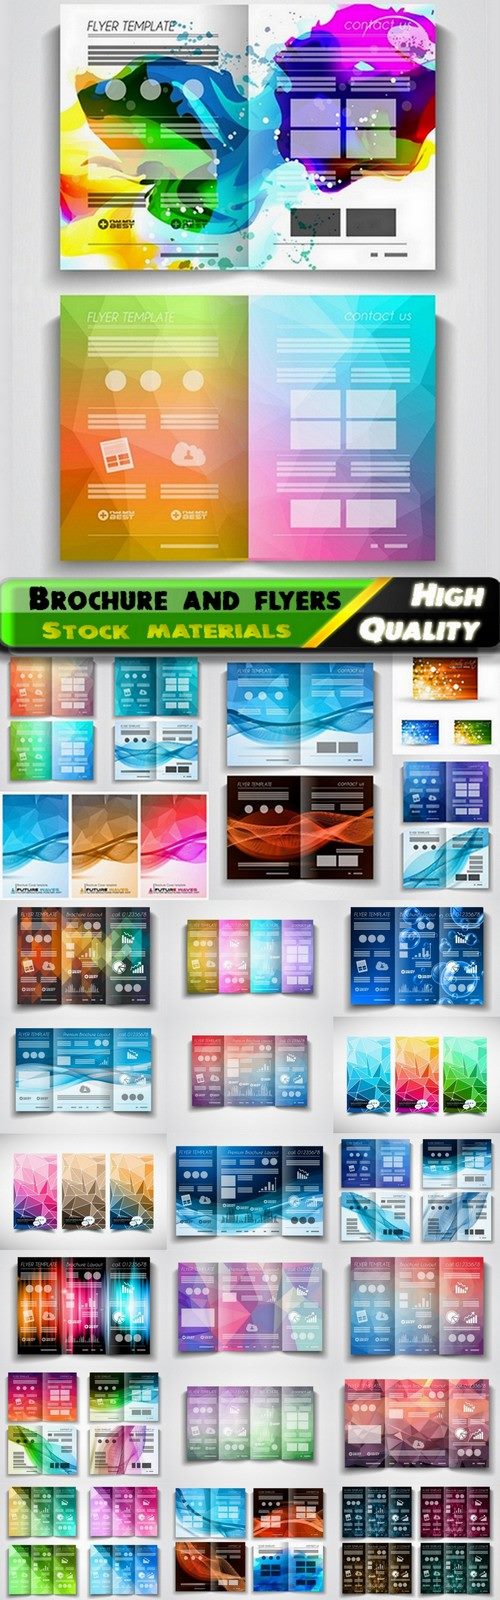 Brochure and flyers template design in vector from stock #53 - 25 Eps